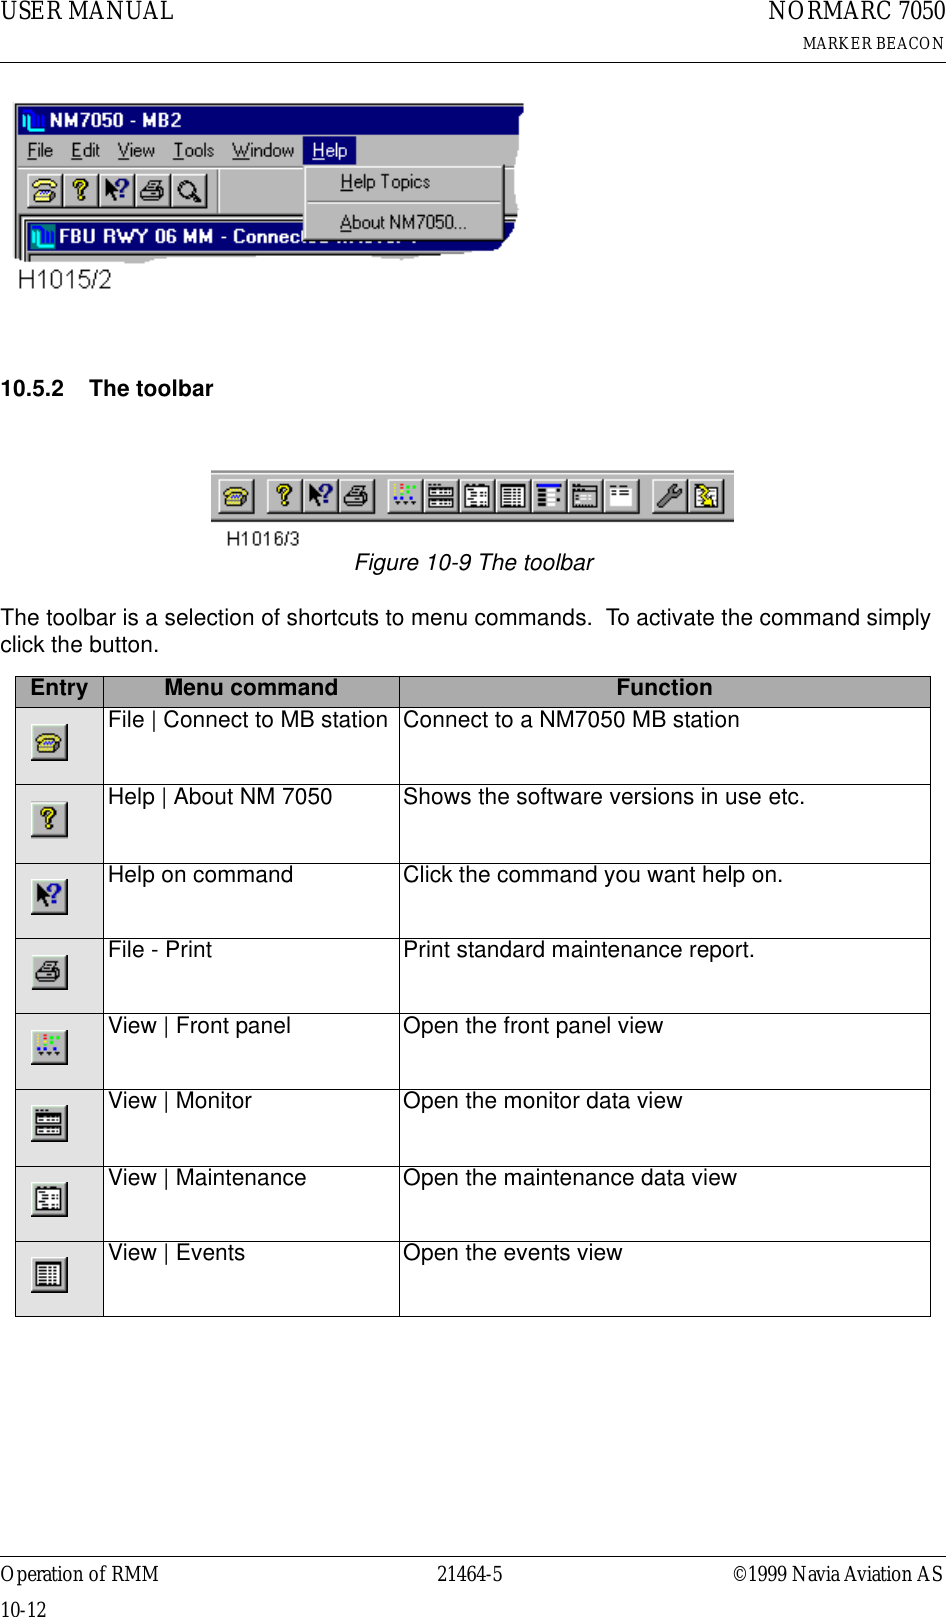 USER MANUAL10-1221464-5NORMARC 7050MARKER BEACONOperation of RMM ©1999 Navia Aviation AS10.5.2 The toolbarFigure 10-9 The toolbarThe toolbar is a selection of shortcuts to menu commands.  To activate the command simply click the button. Entry Menu command FunctionFile | Connect to MB station Connect to a NM7050 MB stationHelp | About NM 7050 Shows the software versions in use etc.Help on command Click the command you want help on.File - Print Print standard maintenance report.View | Front panel Open the front panel viewView | Monitor Open the monitor data viewView | Maintenance Open the maintenance data view View | Events Open the events view